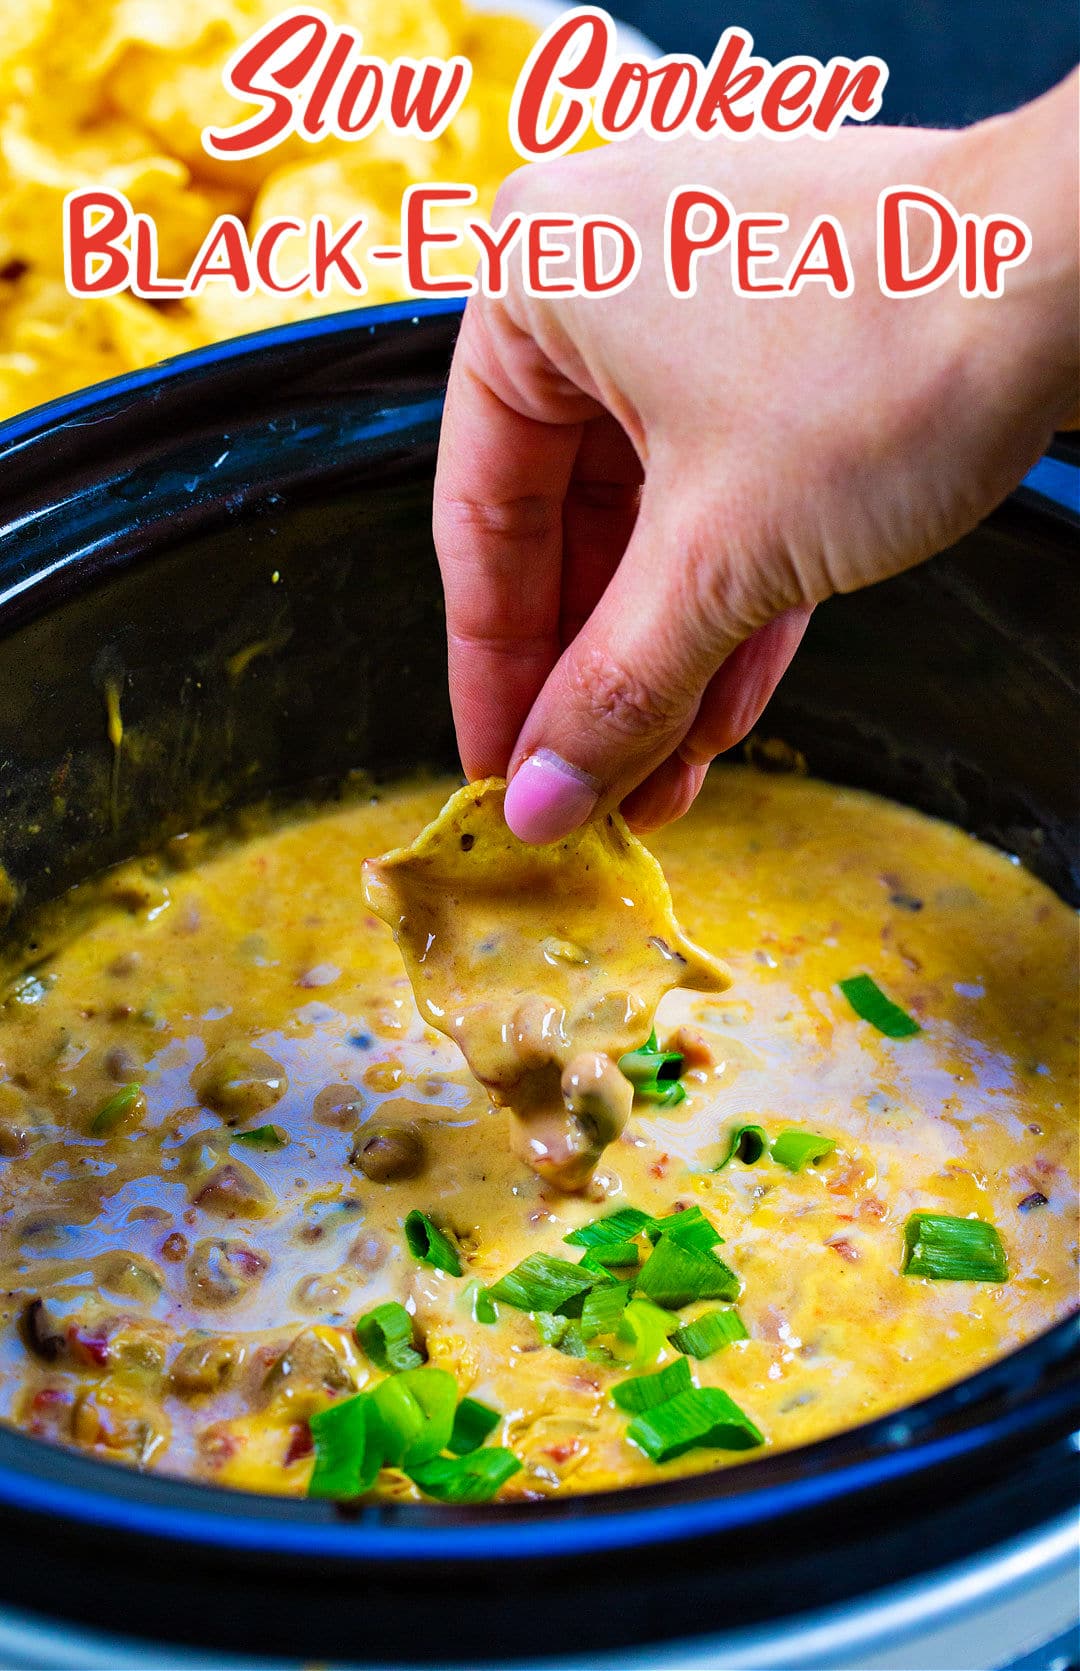 Hand dipping chip into Slow Cooker Black-Eyed Pea Dip.